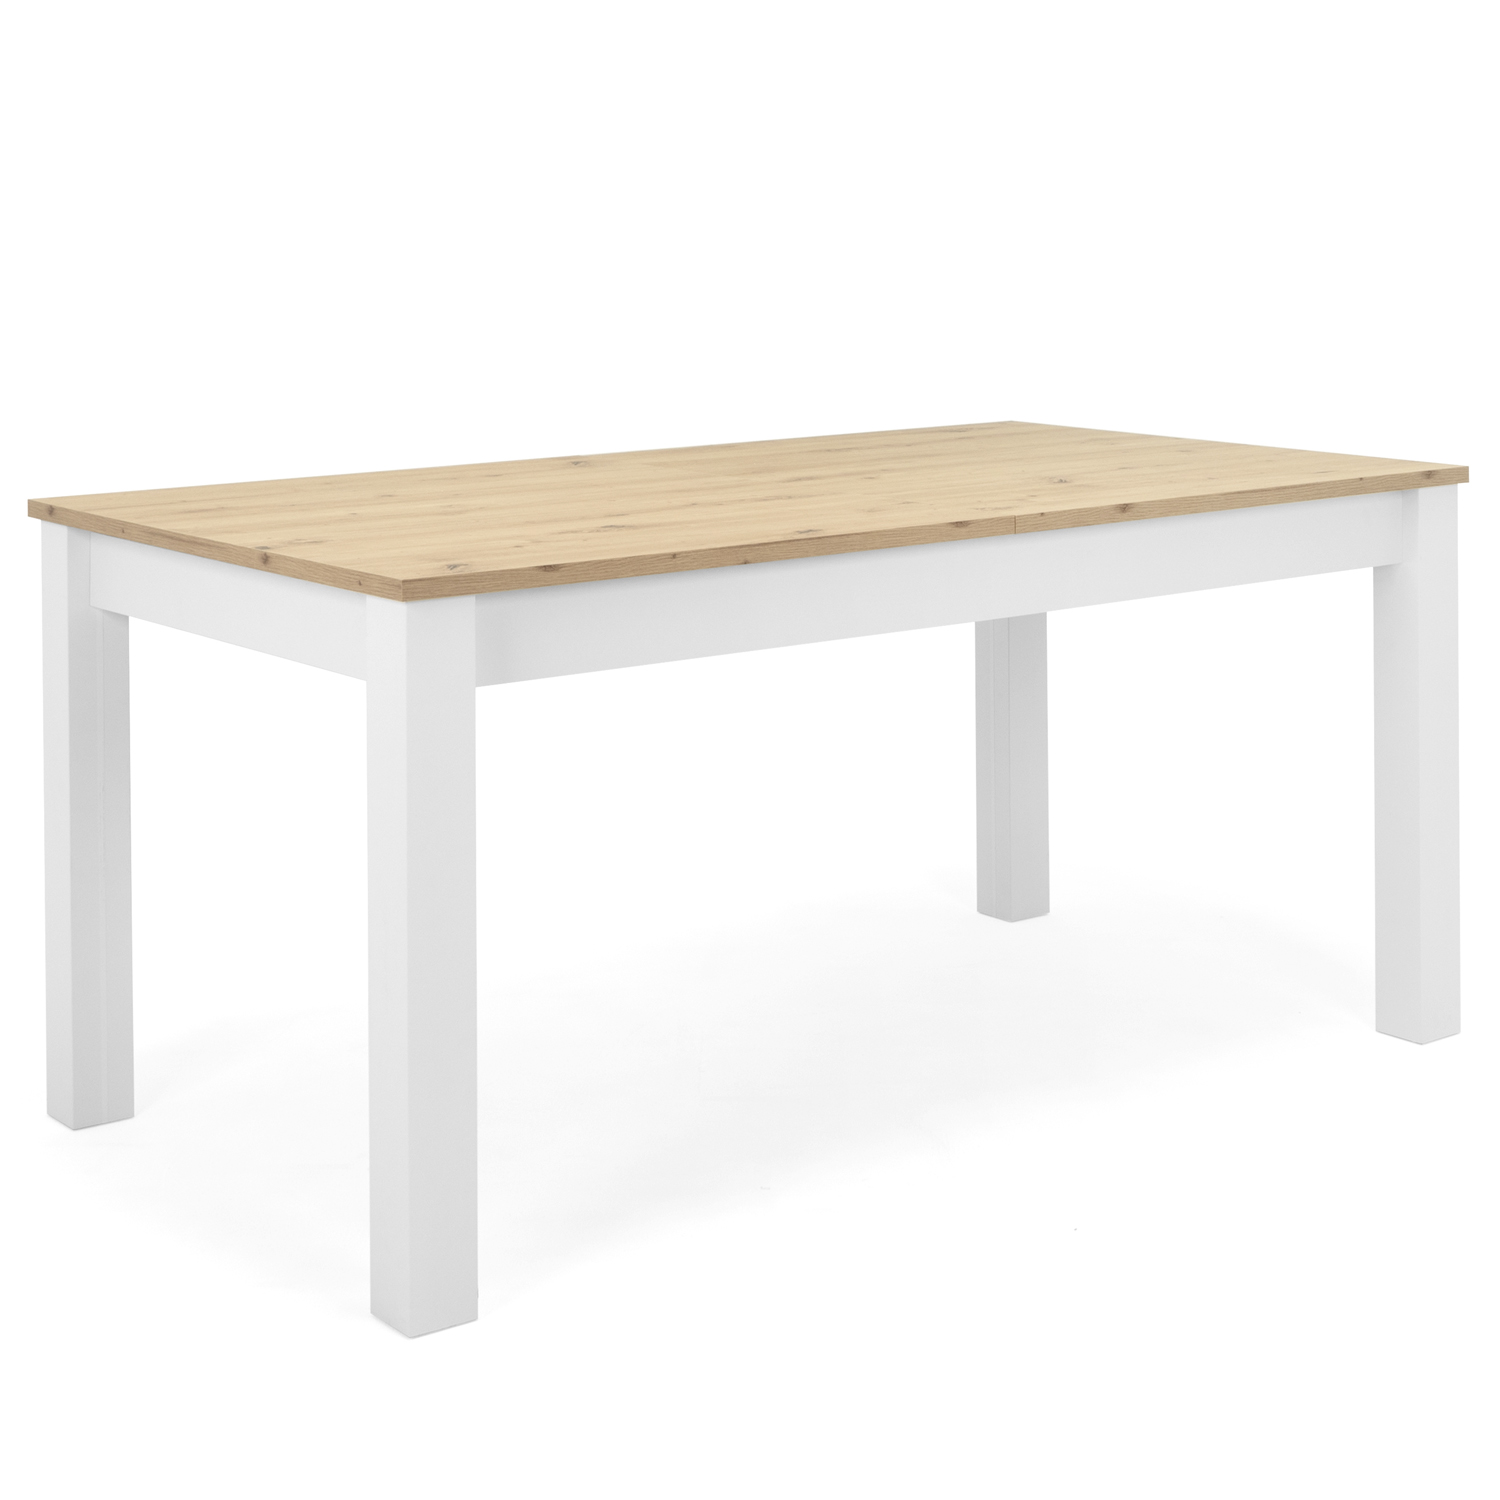 Dining table extendable Dining Room Table Kitchen Table Wooden Table White Oak